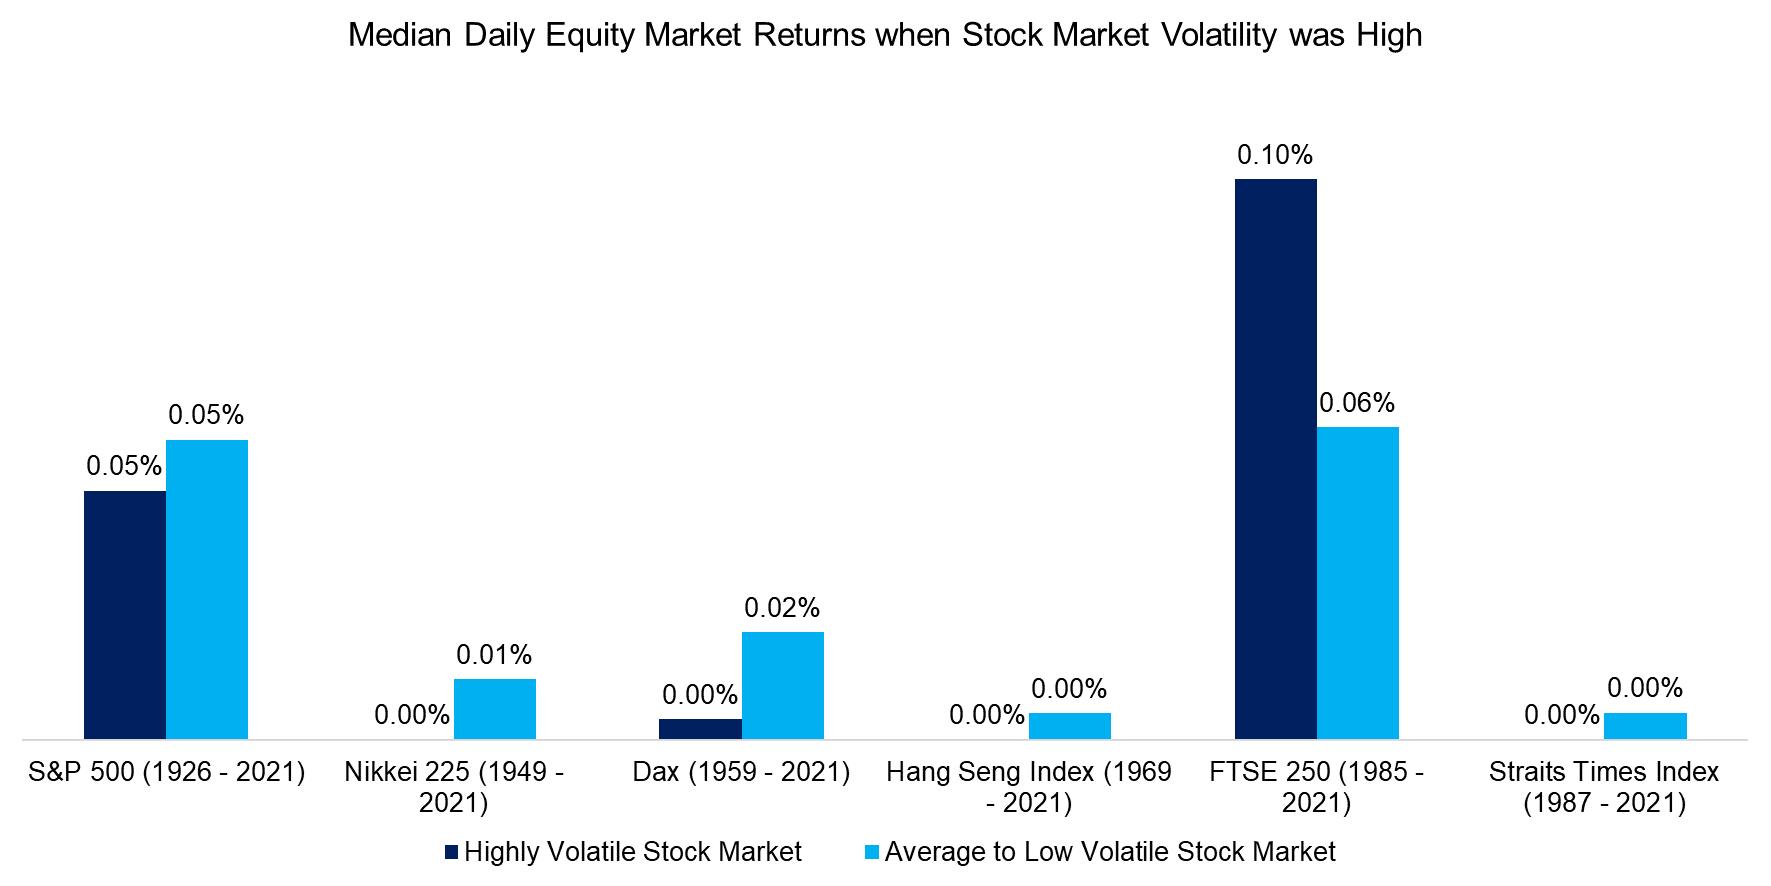 Median Daily Equity Market Returns when Stock Market Volatility was High